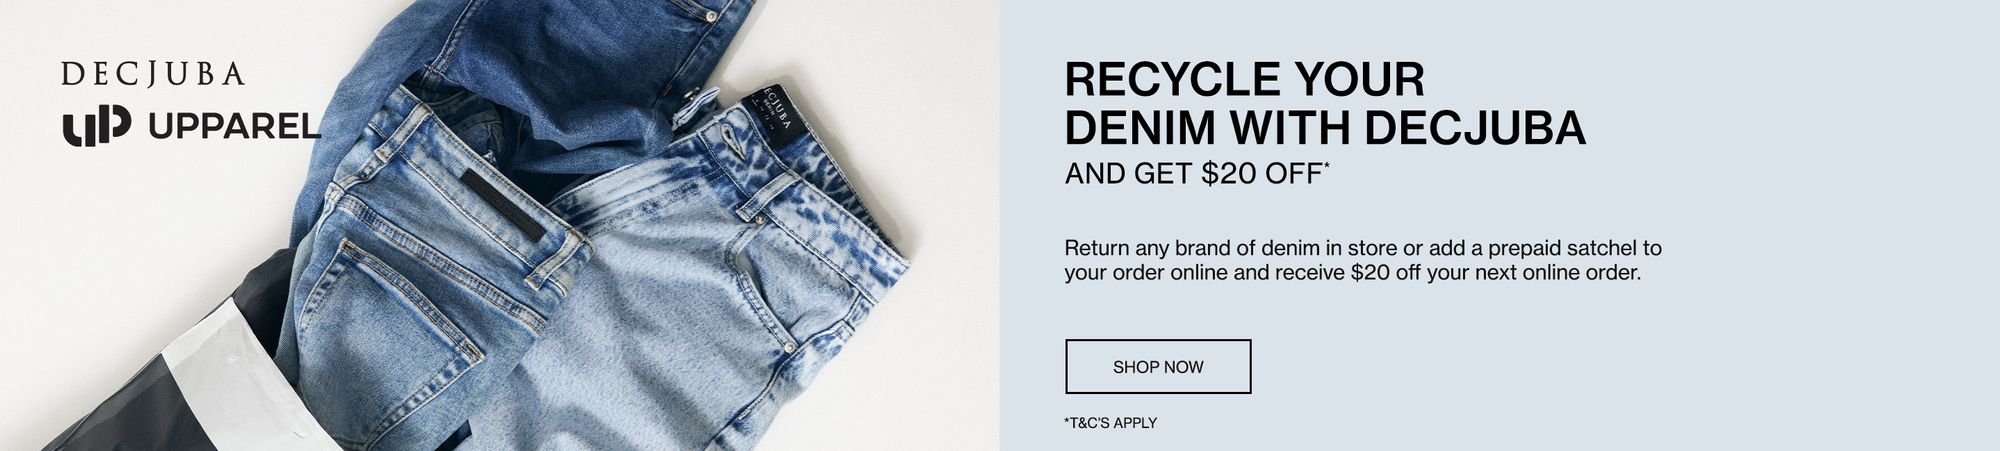 Recycle your denim with DECJUBA and get $20 off